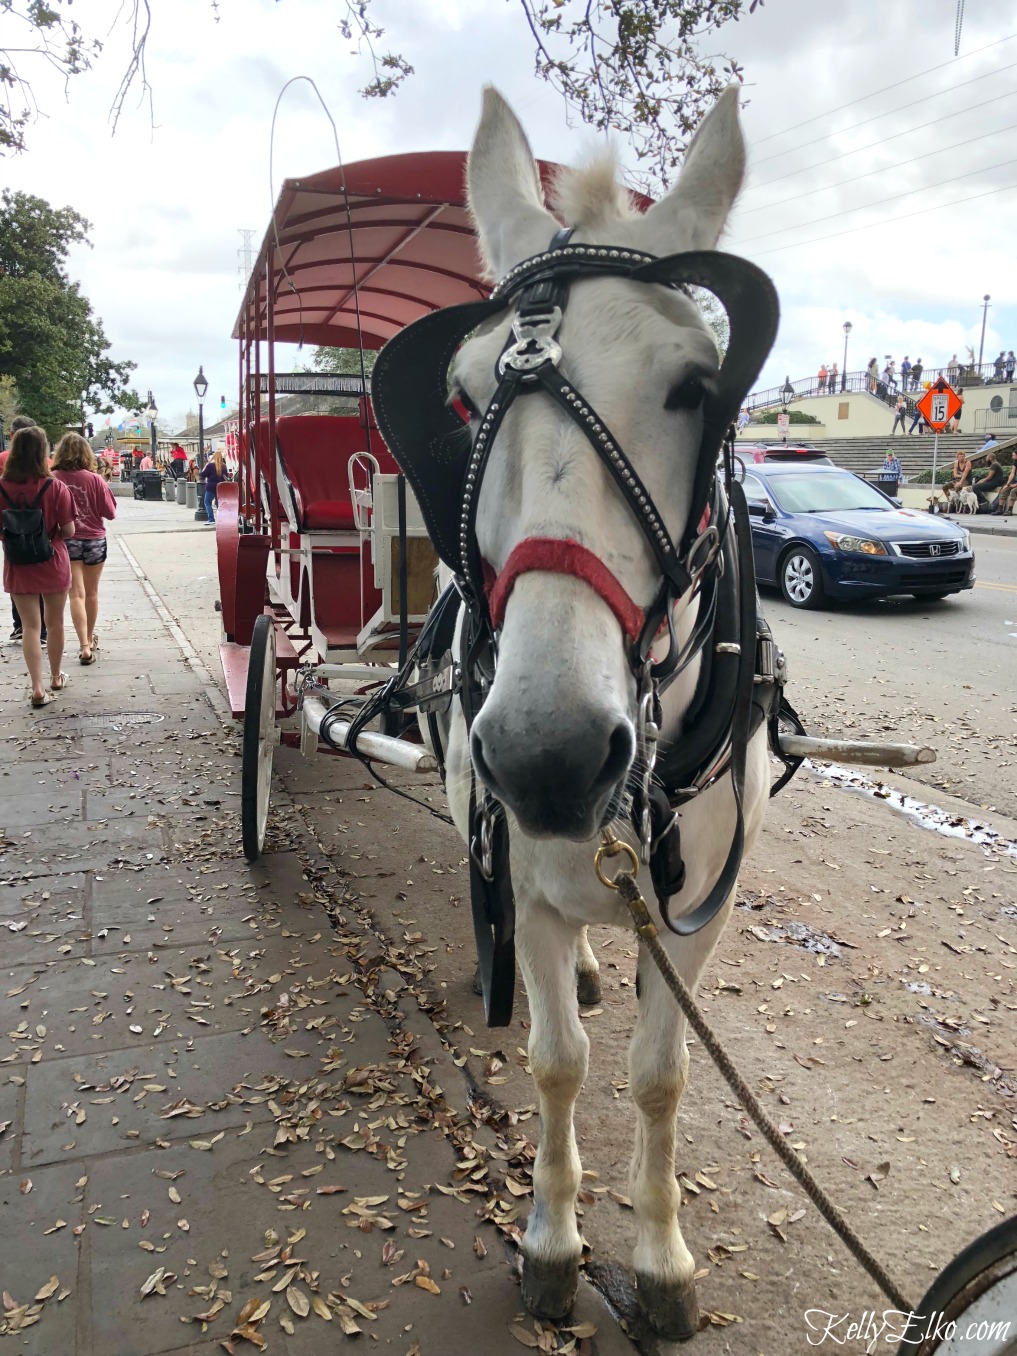 Best of New Orleans - what to see, do and eat. A horse drawn carriage is a fun way to explore NOLA kellyelko.com #neworleans #nola #travel #vacation #horse